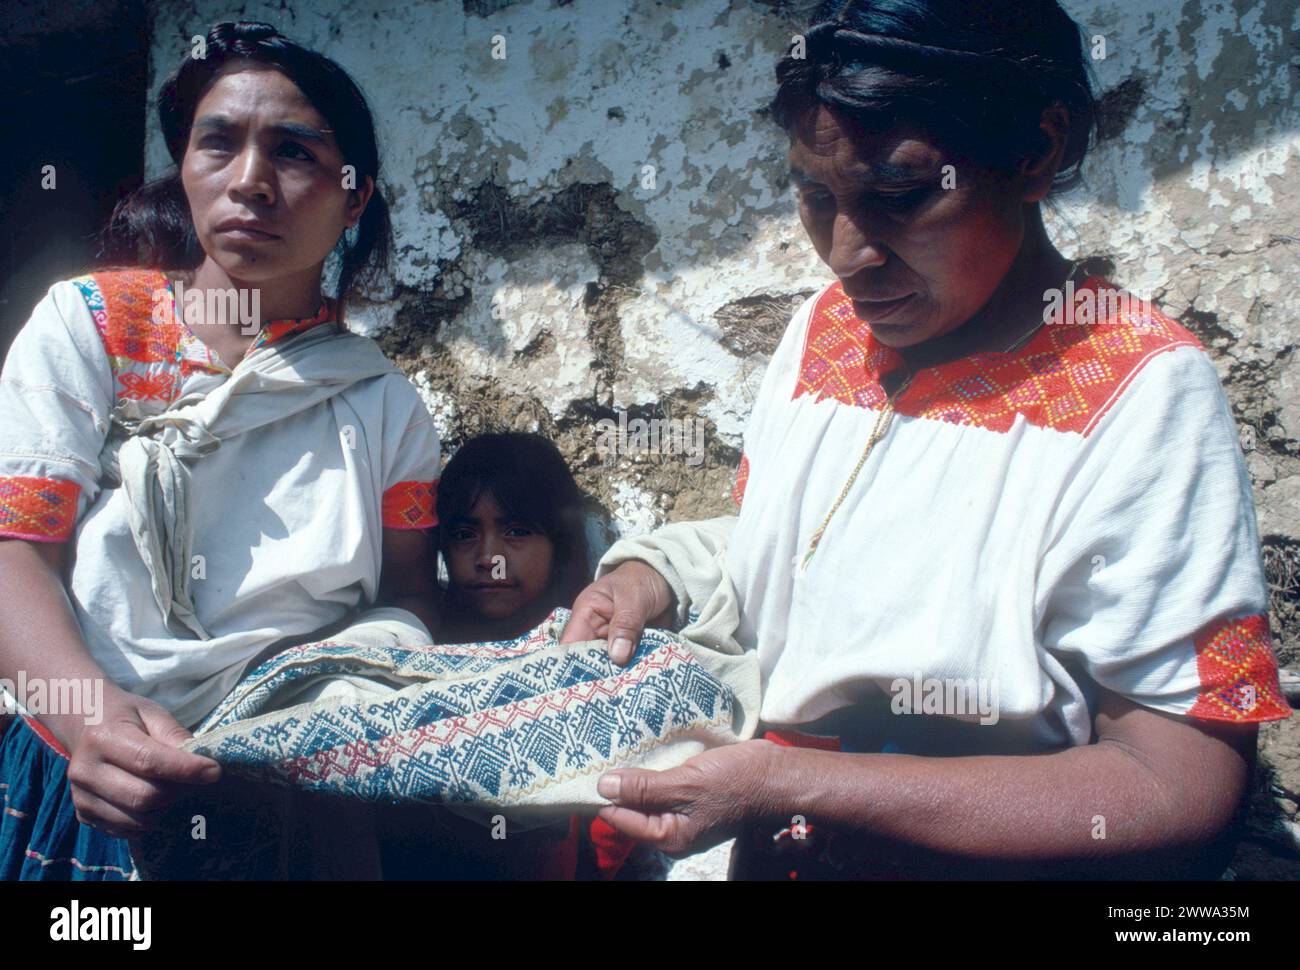 Chamula Tzotzil speaking Maya Indian woman weavers inspect the workmanship and brocaded design on a 100 year old huipil (Maya blouse) that was studied and found to encode an ancient Maya date. The ancient huipil was made on a traditional backstrap loom, just like the looms used by traditional Maya weavers today.  Huipils depicted on Late Classic (AD 600-900) clay figurines are little changed from those worn today.  Photographed on November 15, 1978 in San Juan Chamula, Highland Chiapas, southern Mexico. Stock Photo